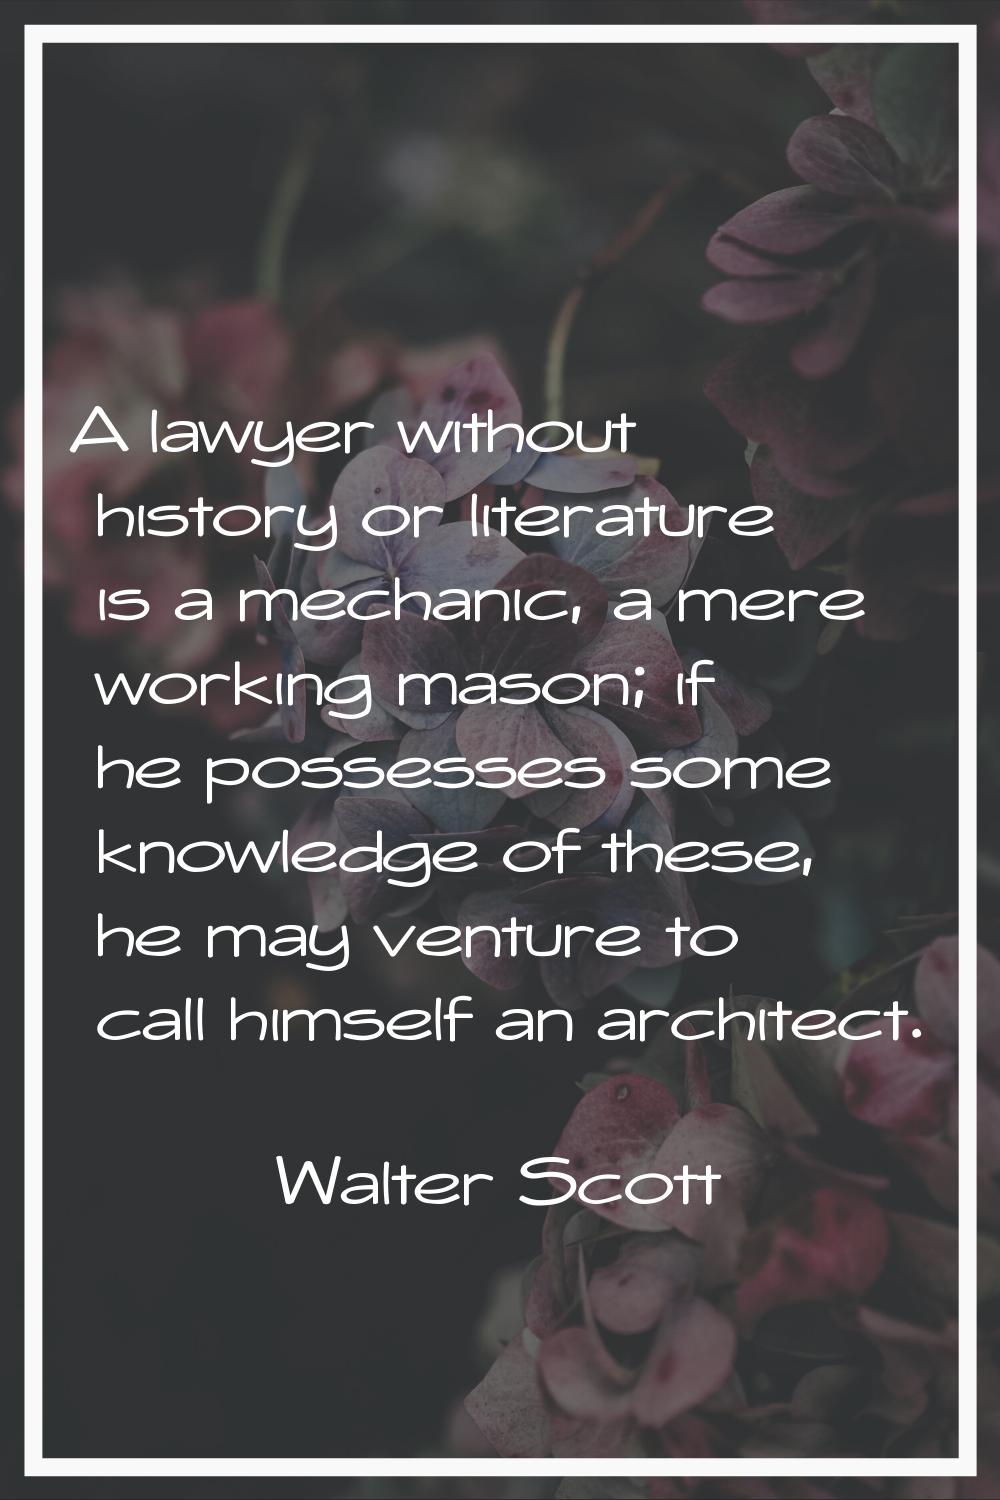 A lawyer without history or literature is a mechanic, a mere working mason; if he possesses some kn